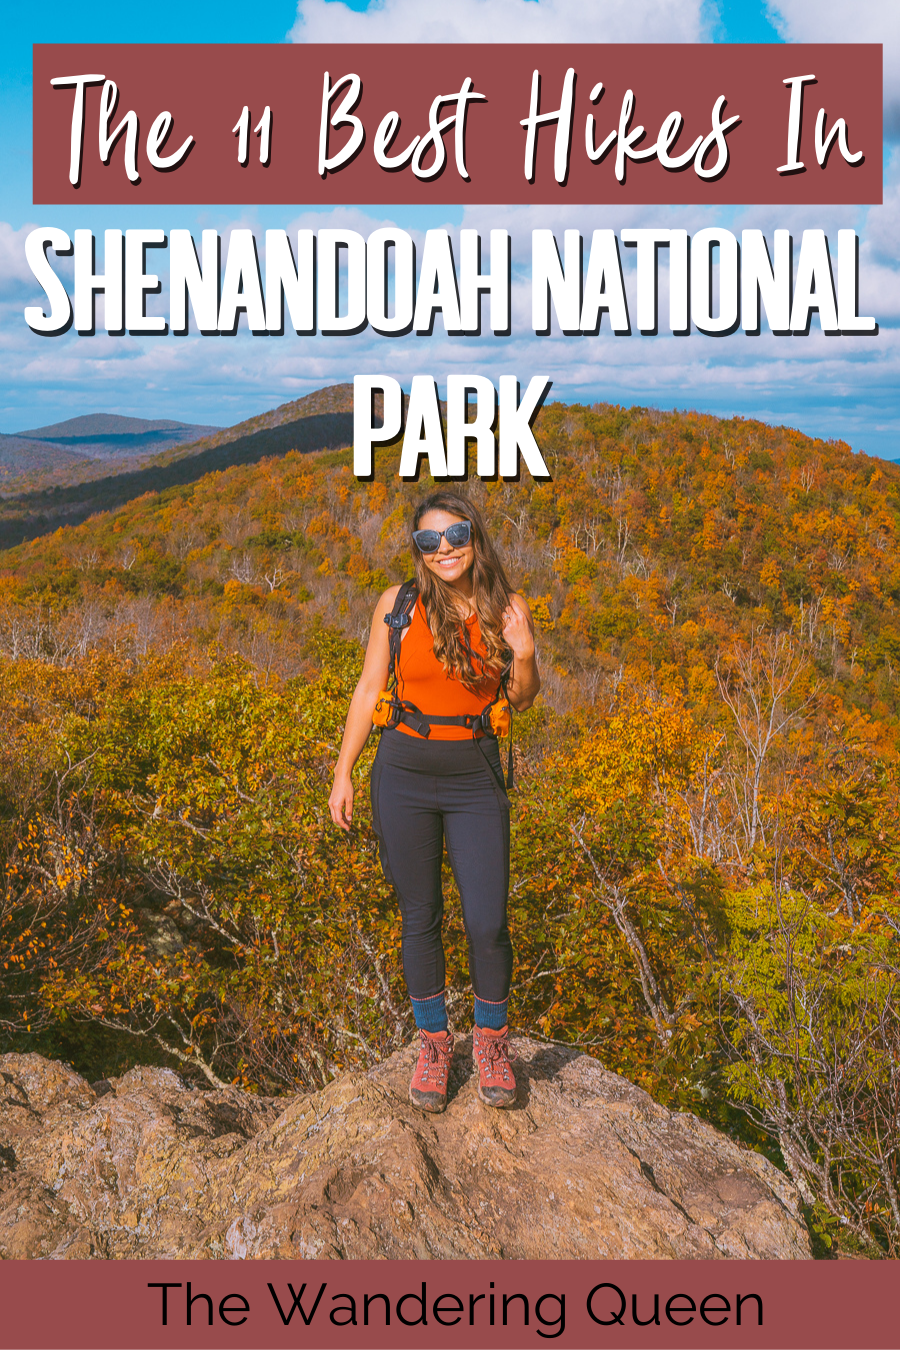 The 11 Best Hikes In Shenandoah National Park - The Wandering Queen